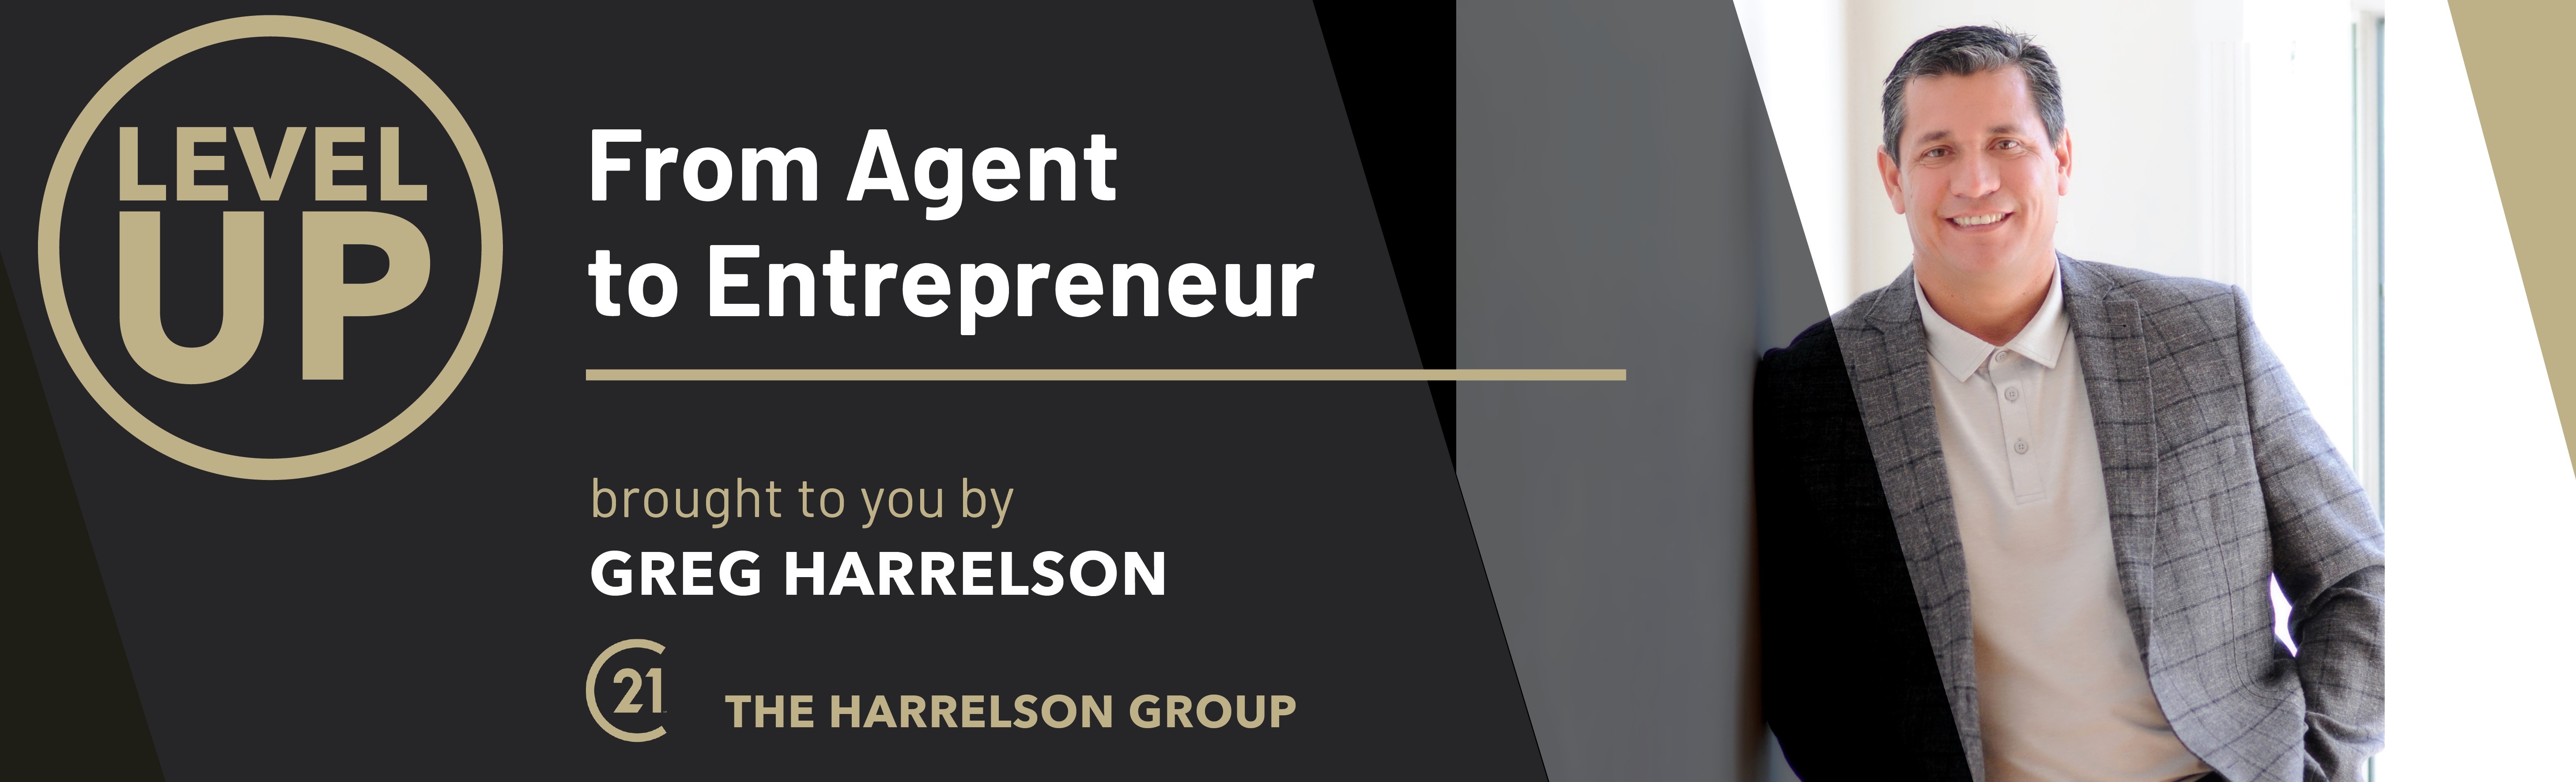 Level Up - From Agent to Entrepreneur header image 1